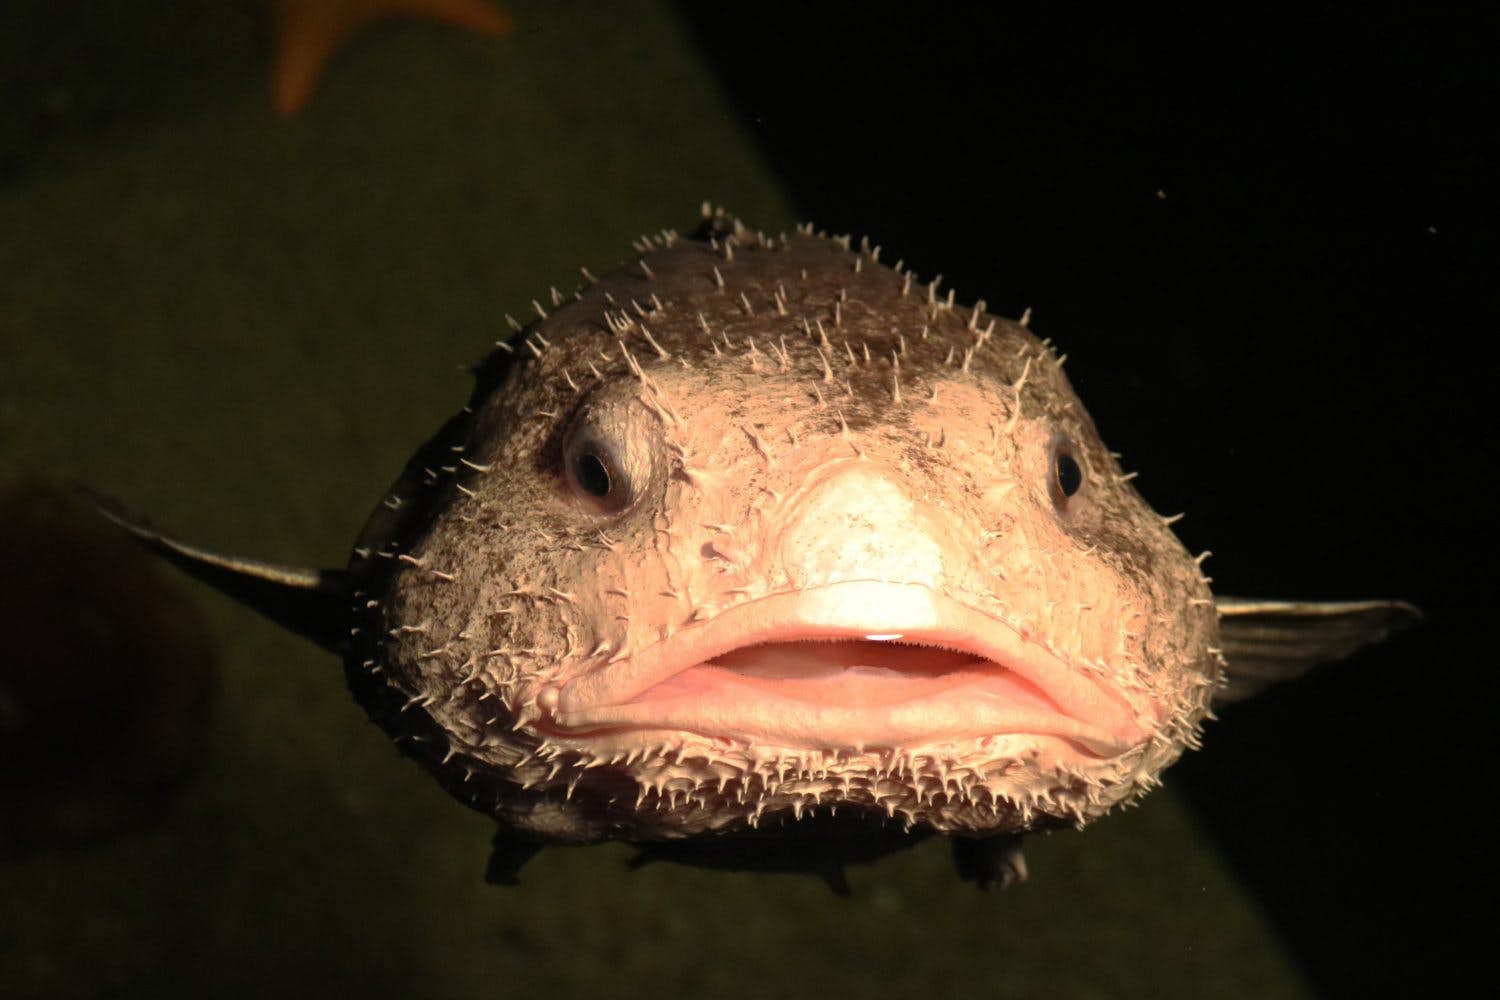 How blobfish (world's ugliest animal) normally look like underwater  before lifting them to the surface causing their tissues to explode.  Blobfish are in danger of extinction. - 9GAG